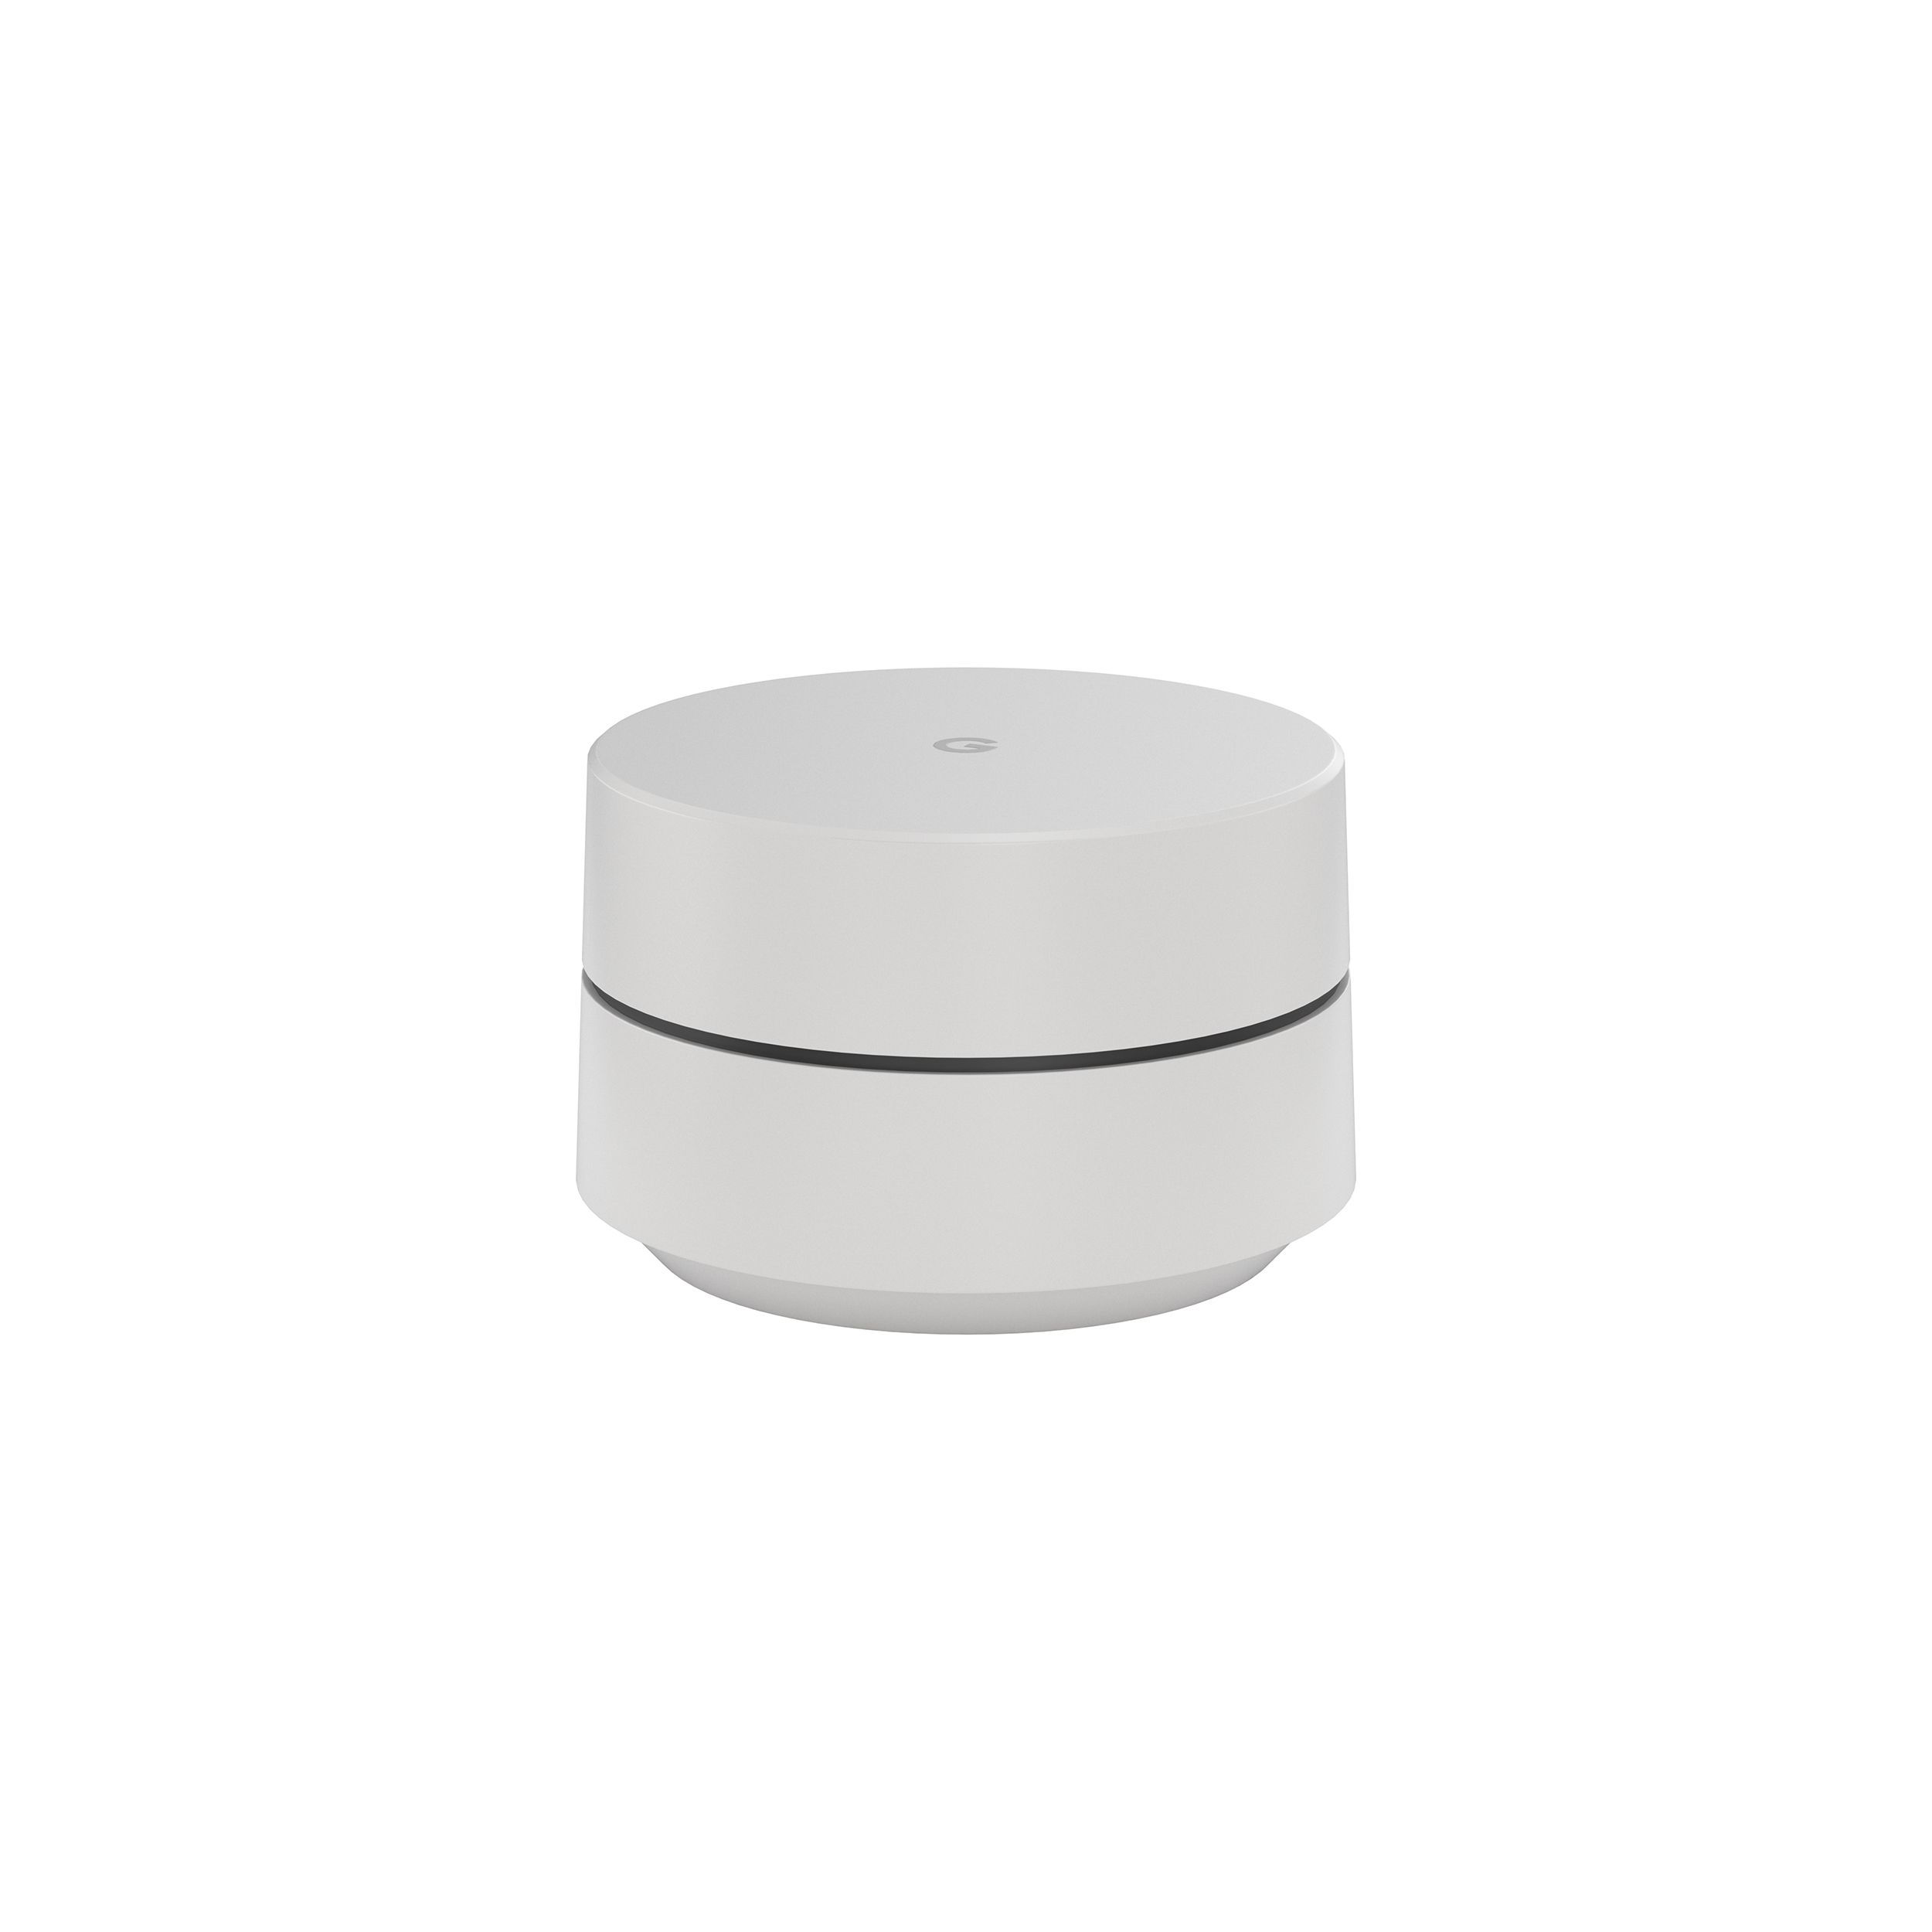 Google Wifi 802.11ac Smart Wireless Router in the Wi-Fi Routers 